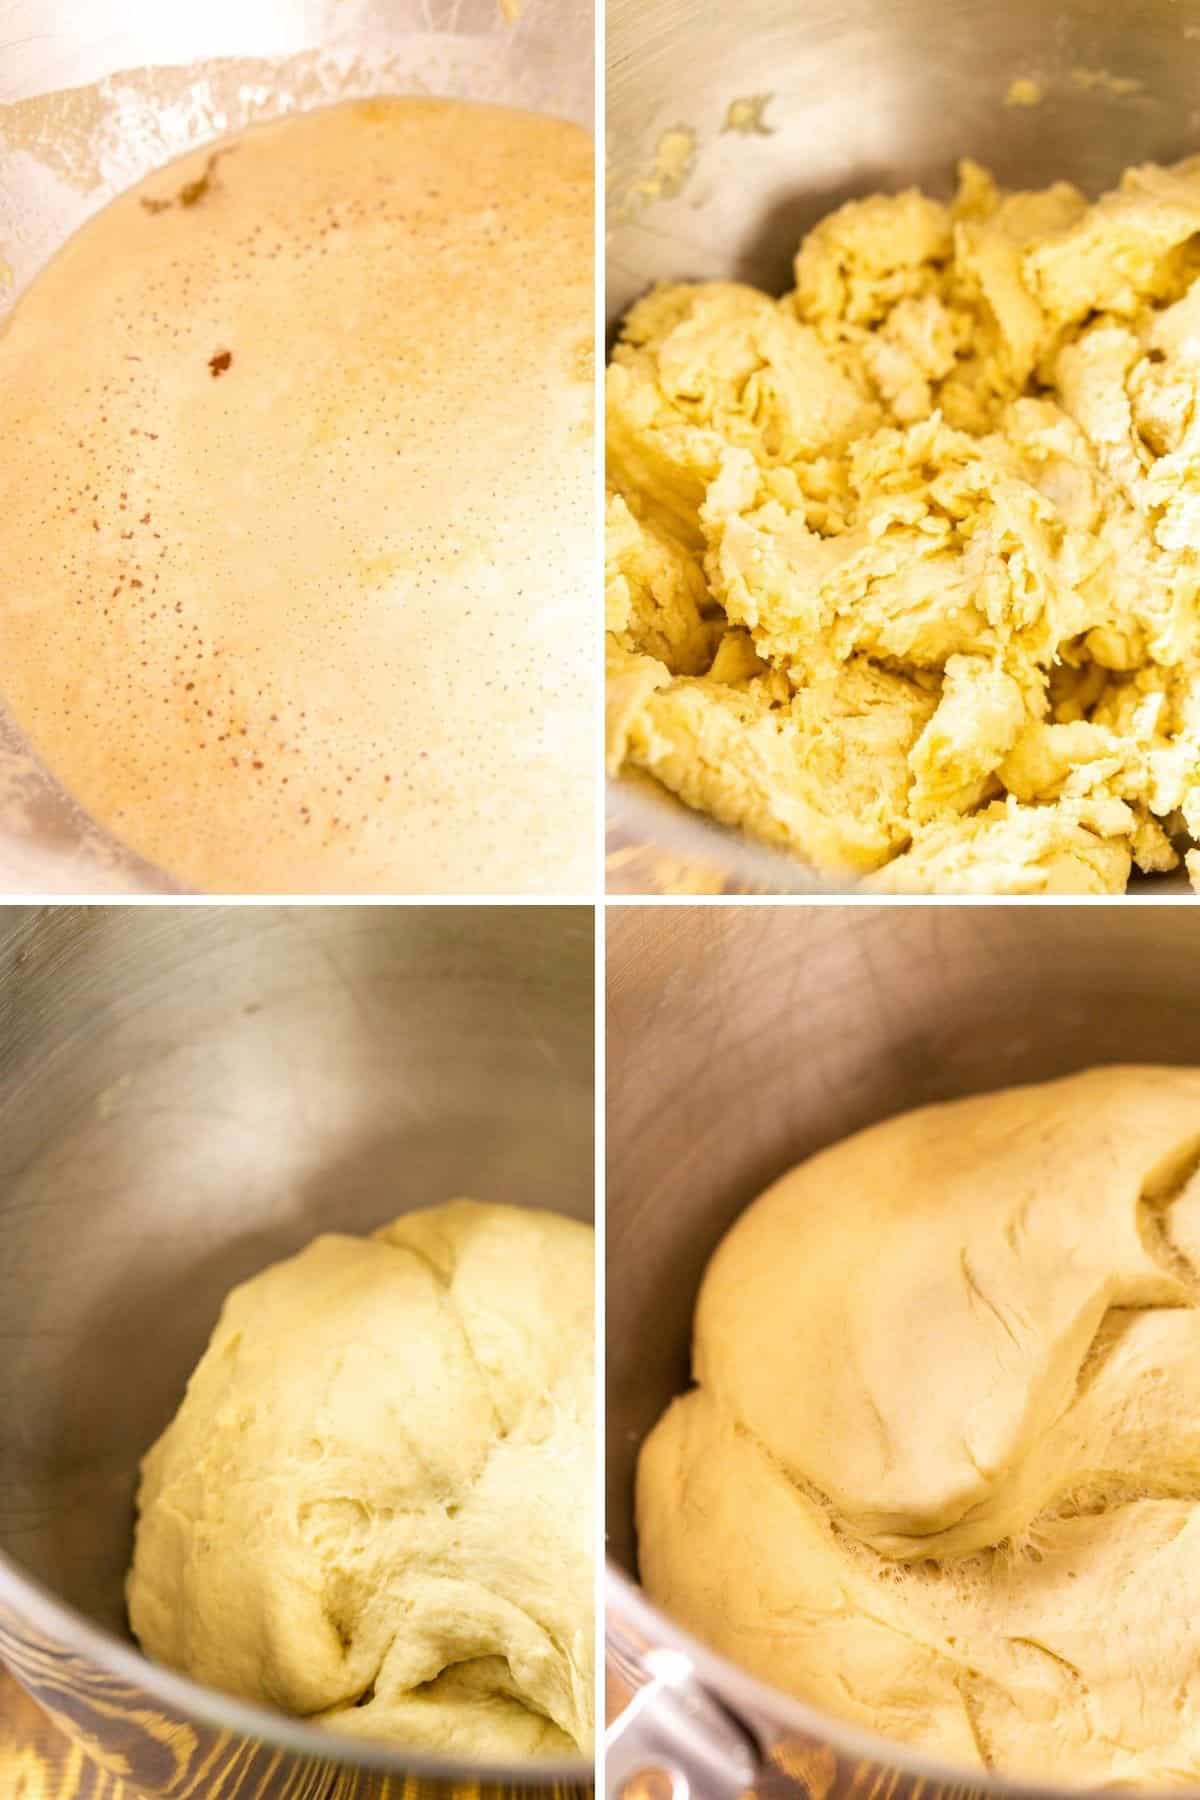 A collage showing the different stages of making the pretzel dough in a large mixing bowl.